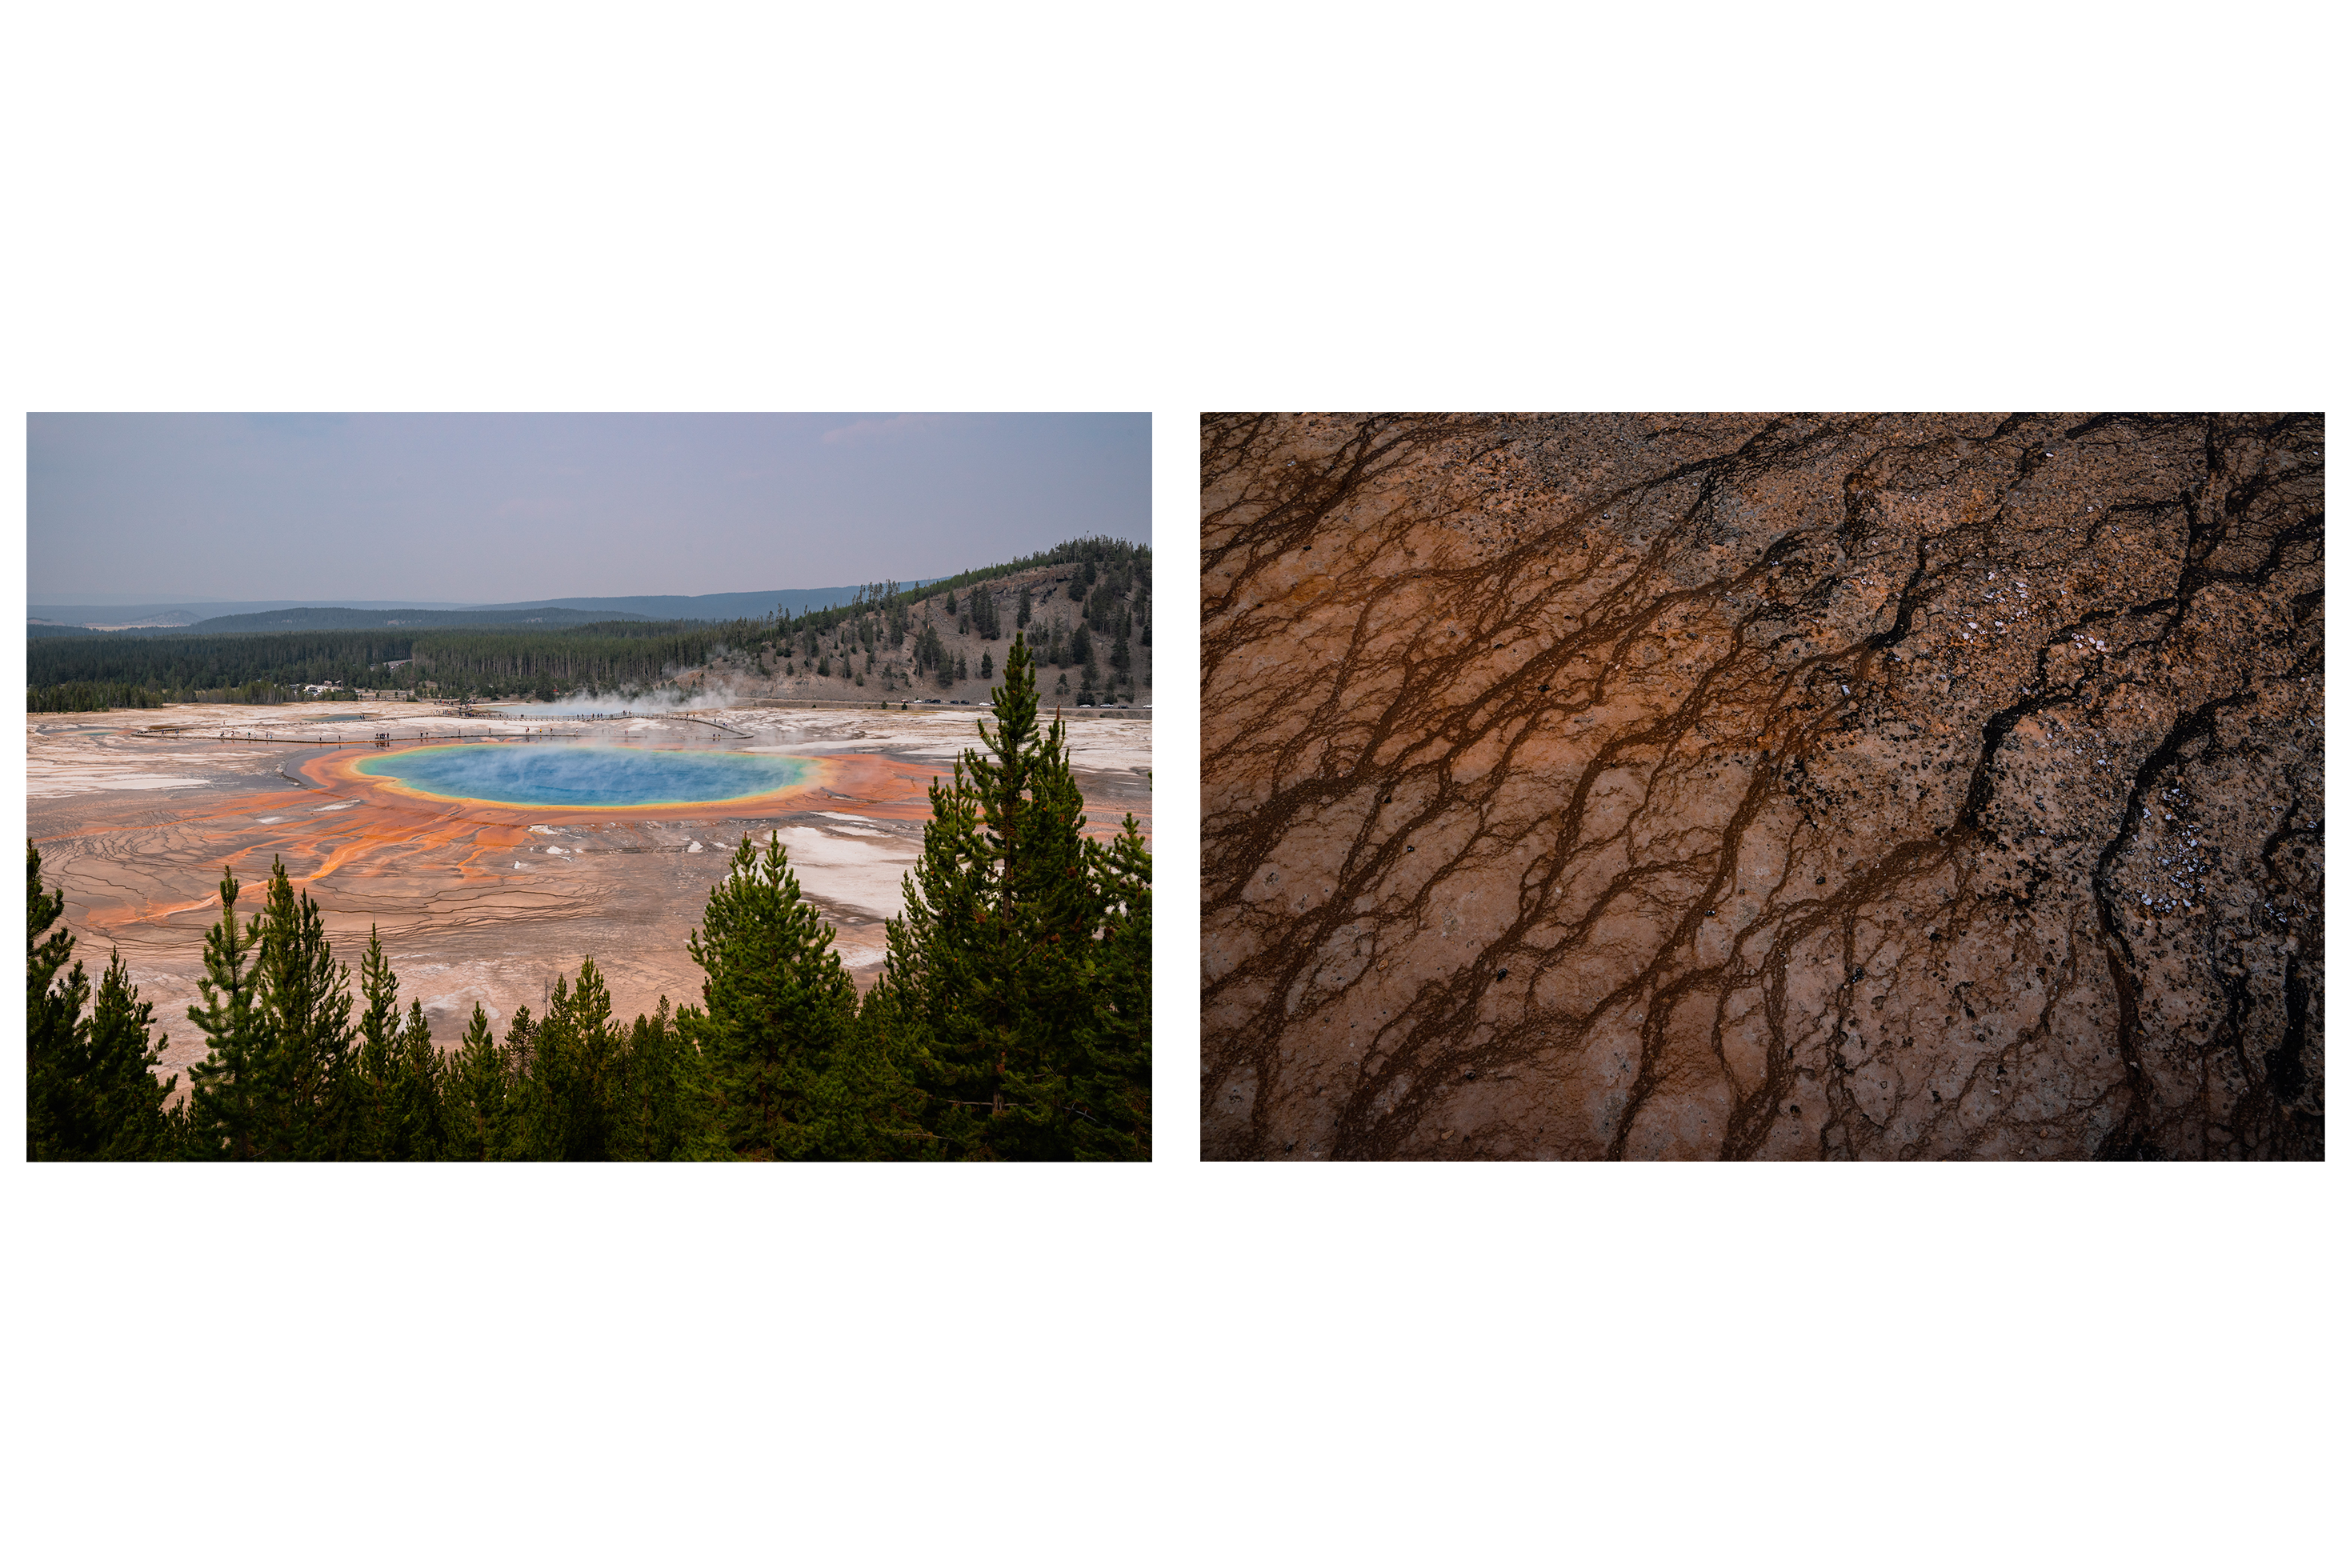 Left: Grand Prismatic Spring is one of Yellowstone&rsquo;s most iconic sights, with a rainbow of colors radiating from the center of the pool to the edges. Right: Microorganisms create a beautiful texture at the Grand Prismatic Spring.